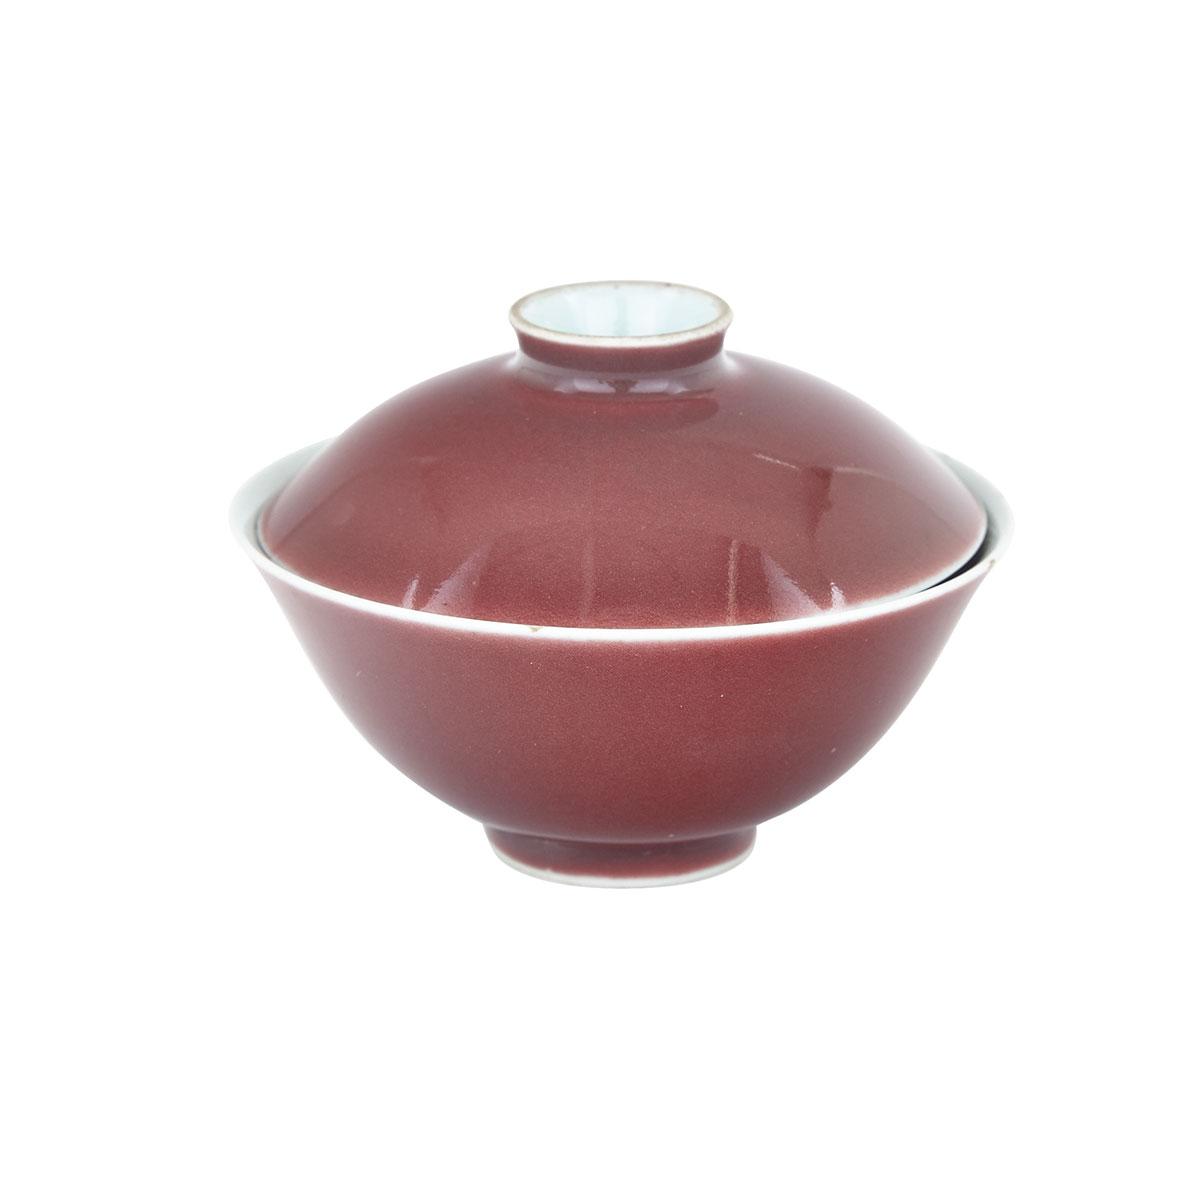 Copper Red Glazed Bowl and Cover, 18th Century